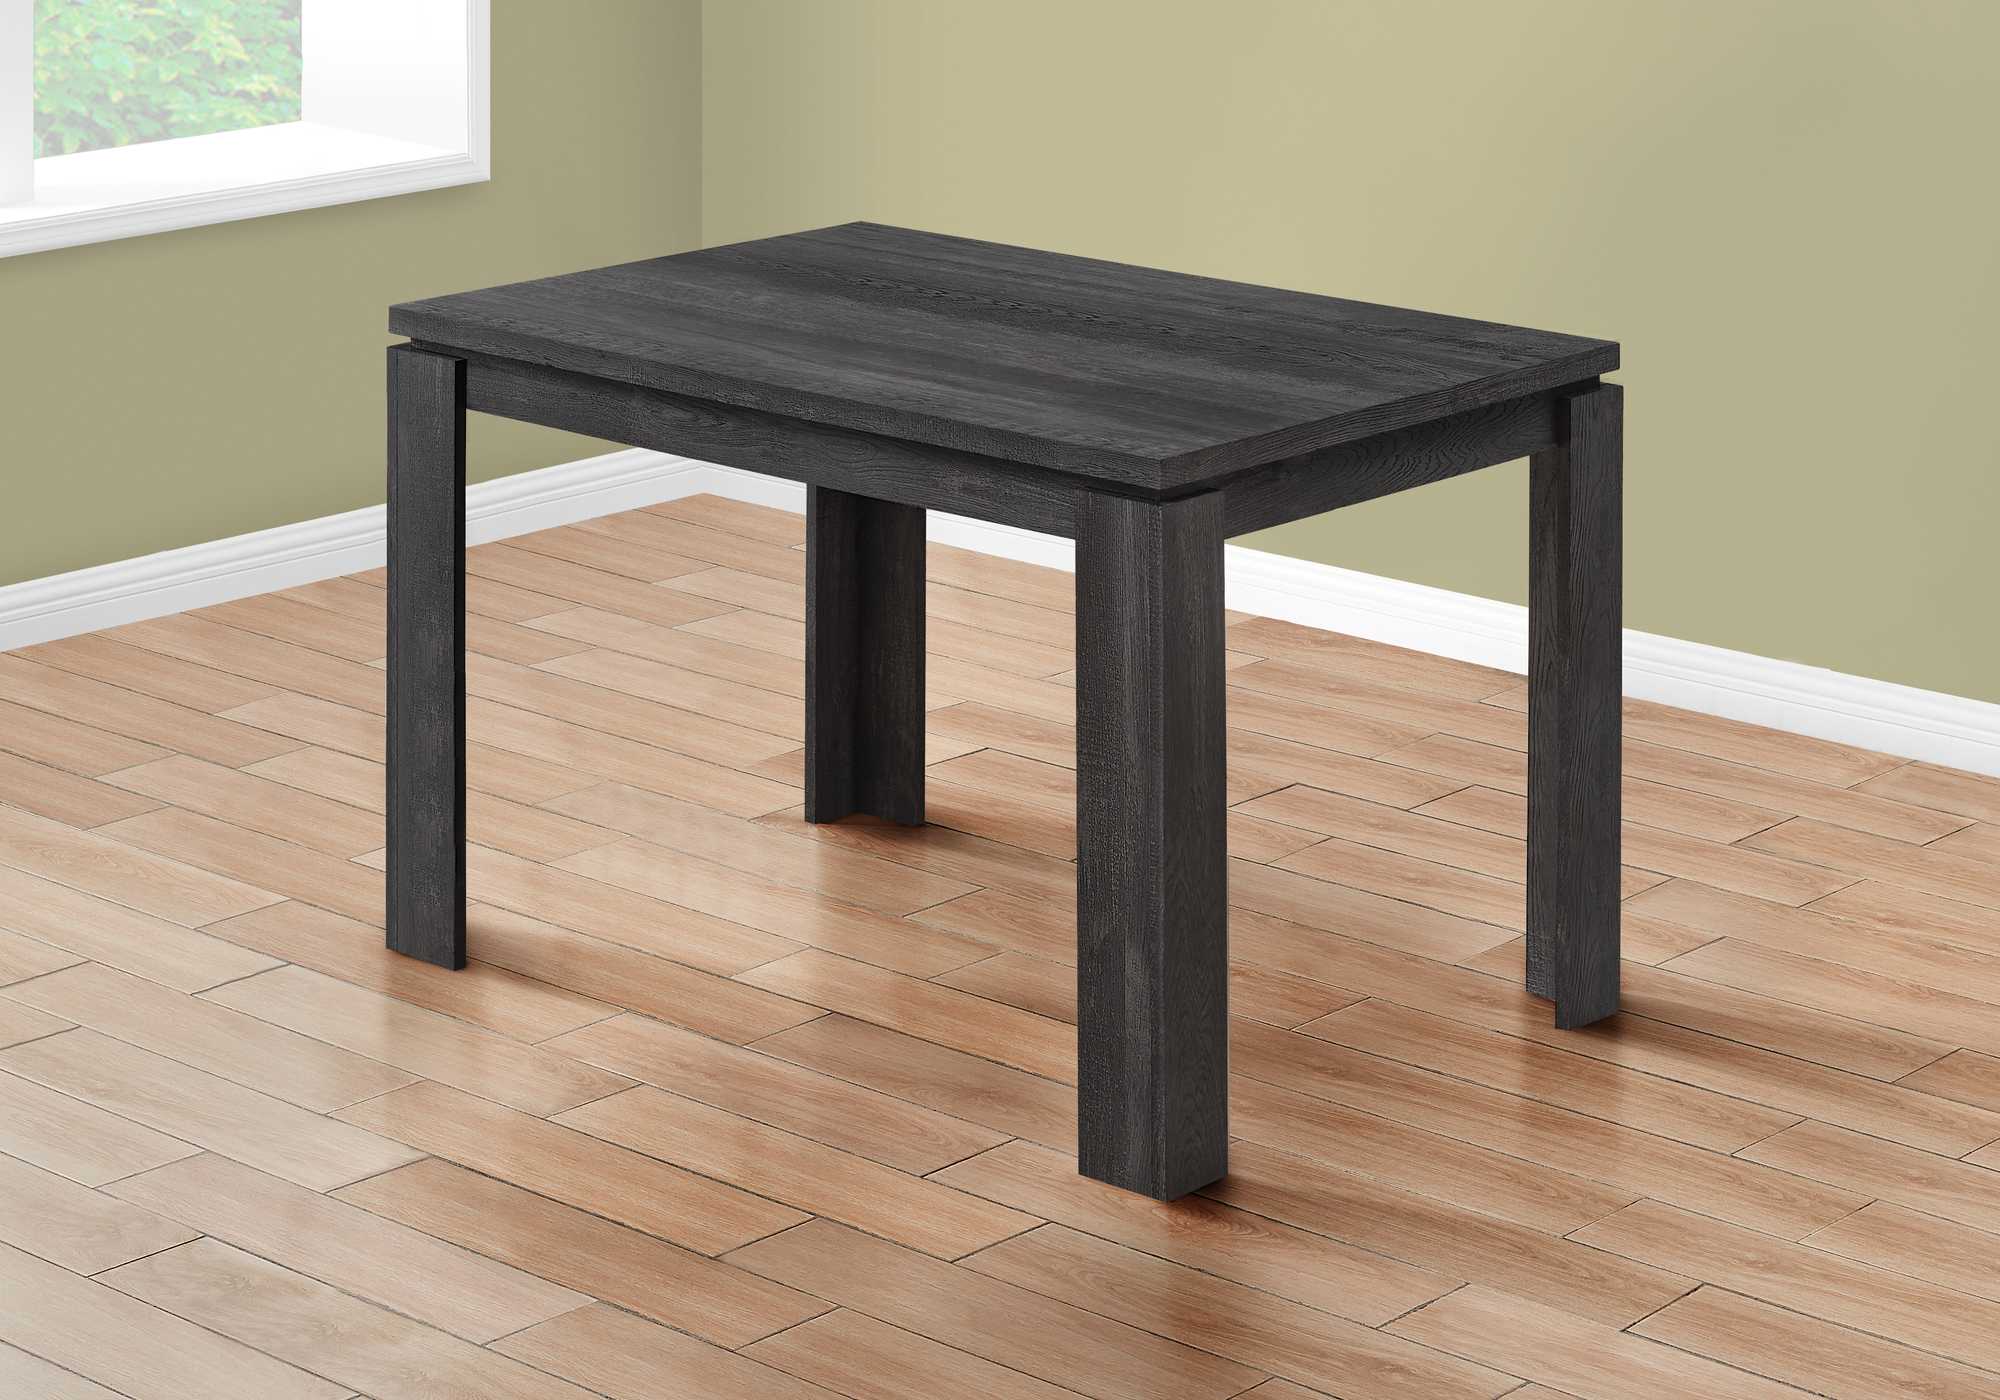 48" X 32" X 30.5 " Black Reclaimed Wood-Look Dining Table